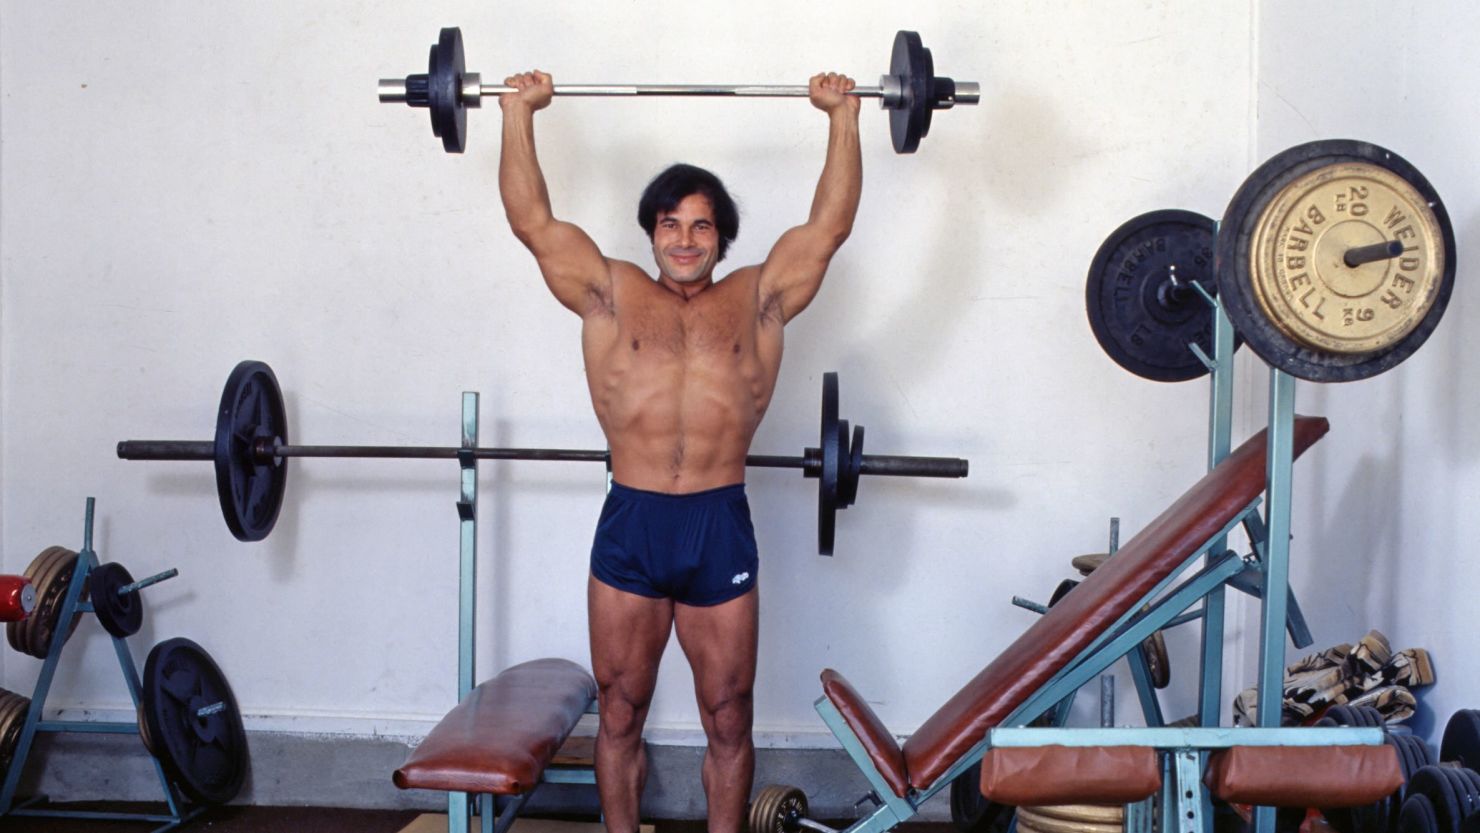 Franco Columbu smiles as he lifts weights in Los Angeles in 1978.